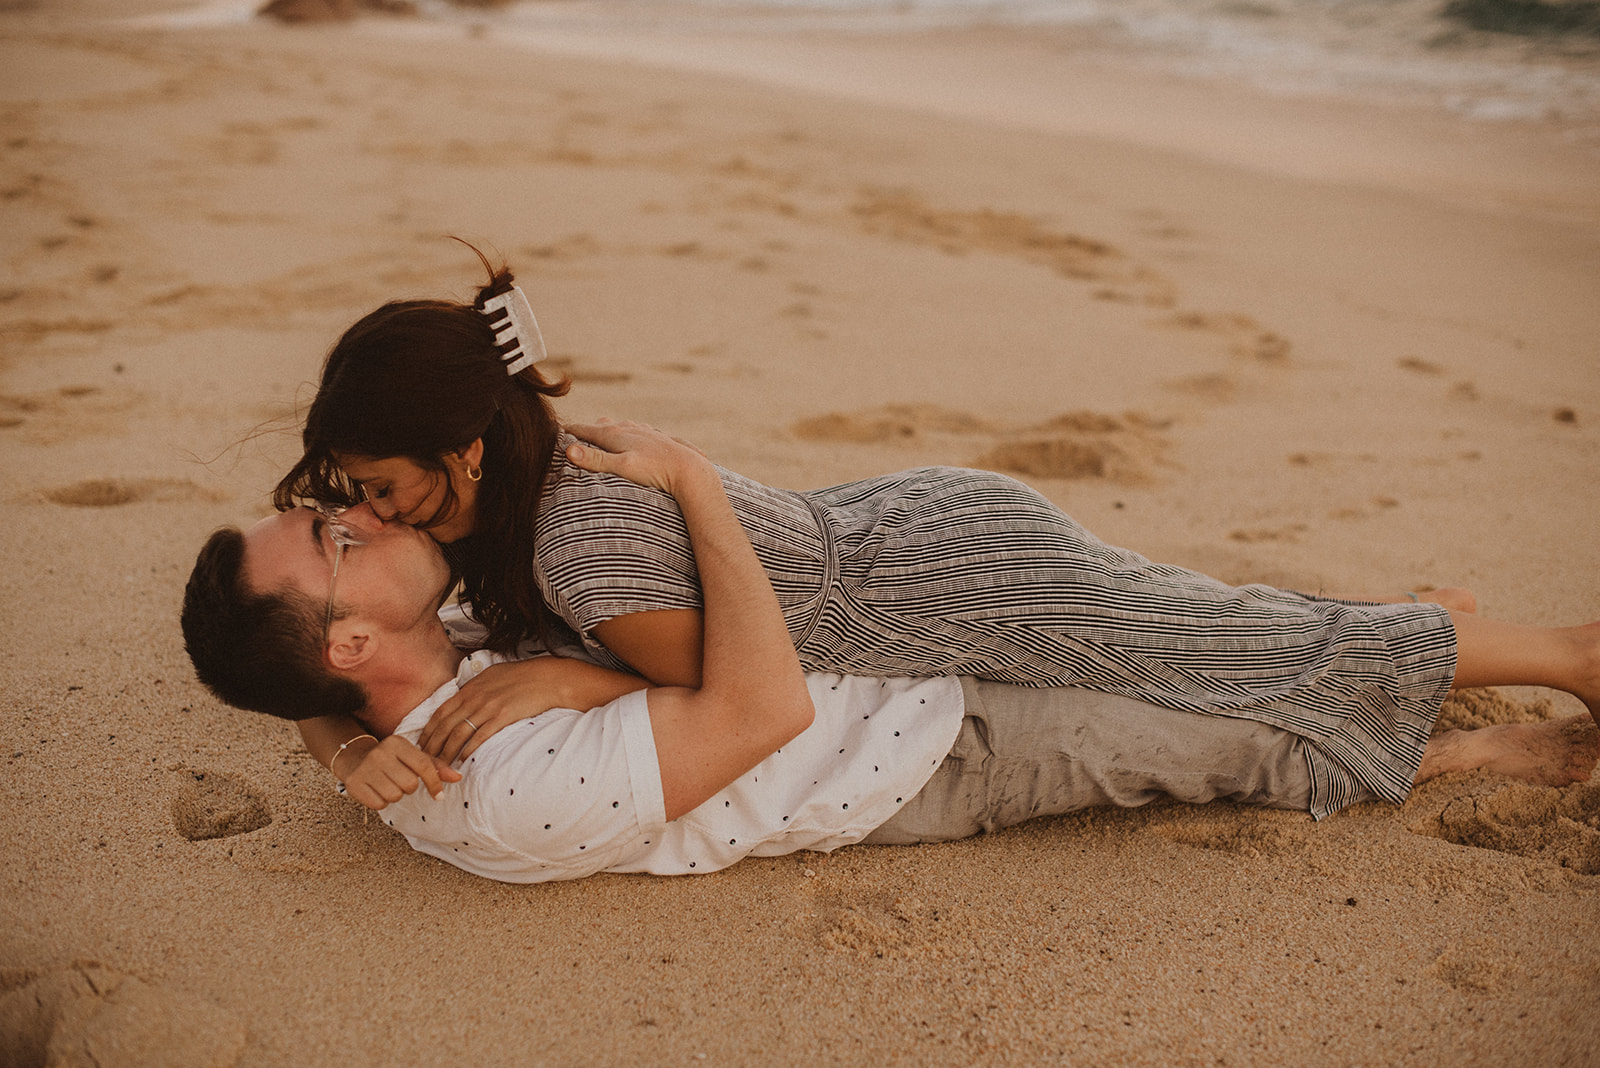 A fun couple's photoshoot in Los Cabos Mexico with McKenzie Shea Photography